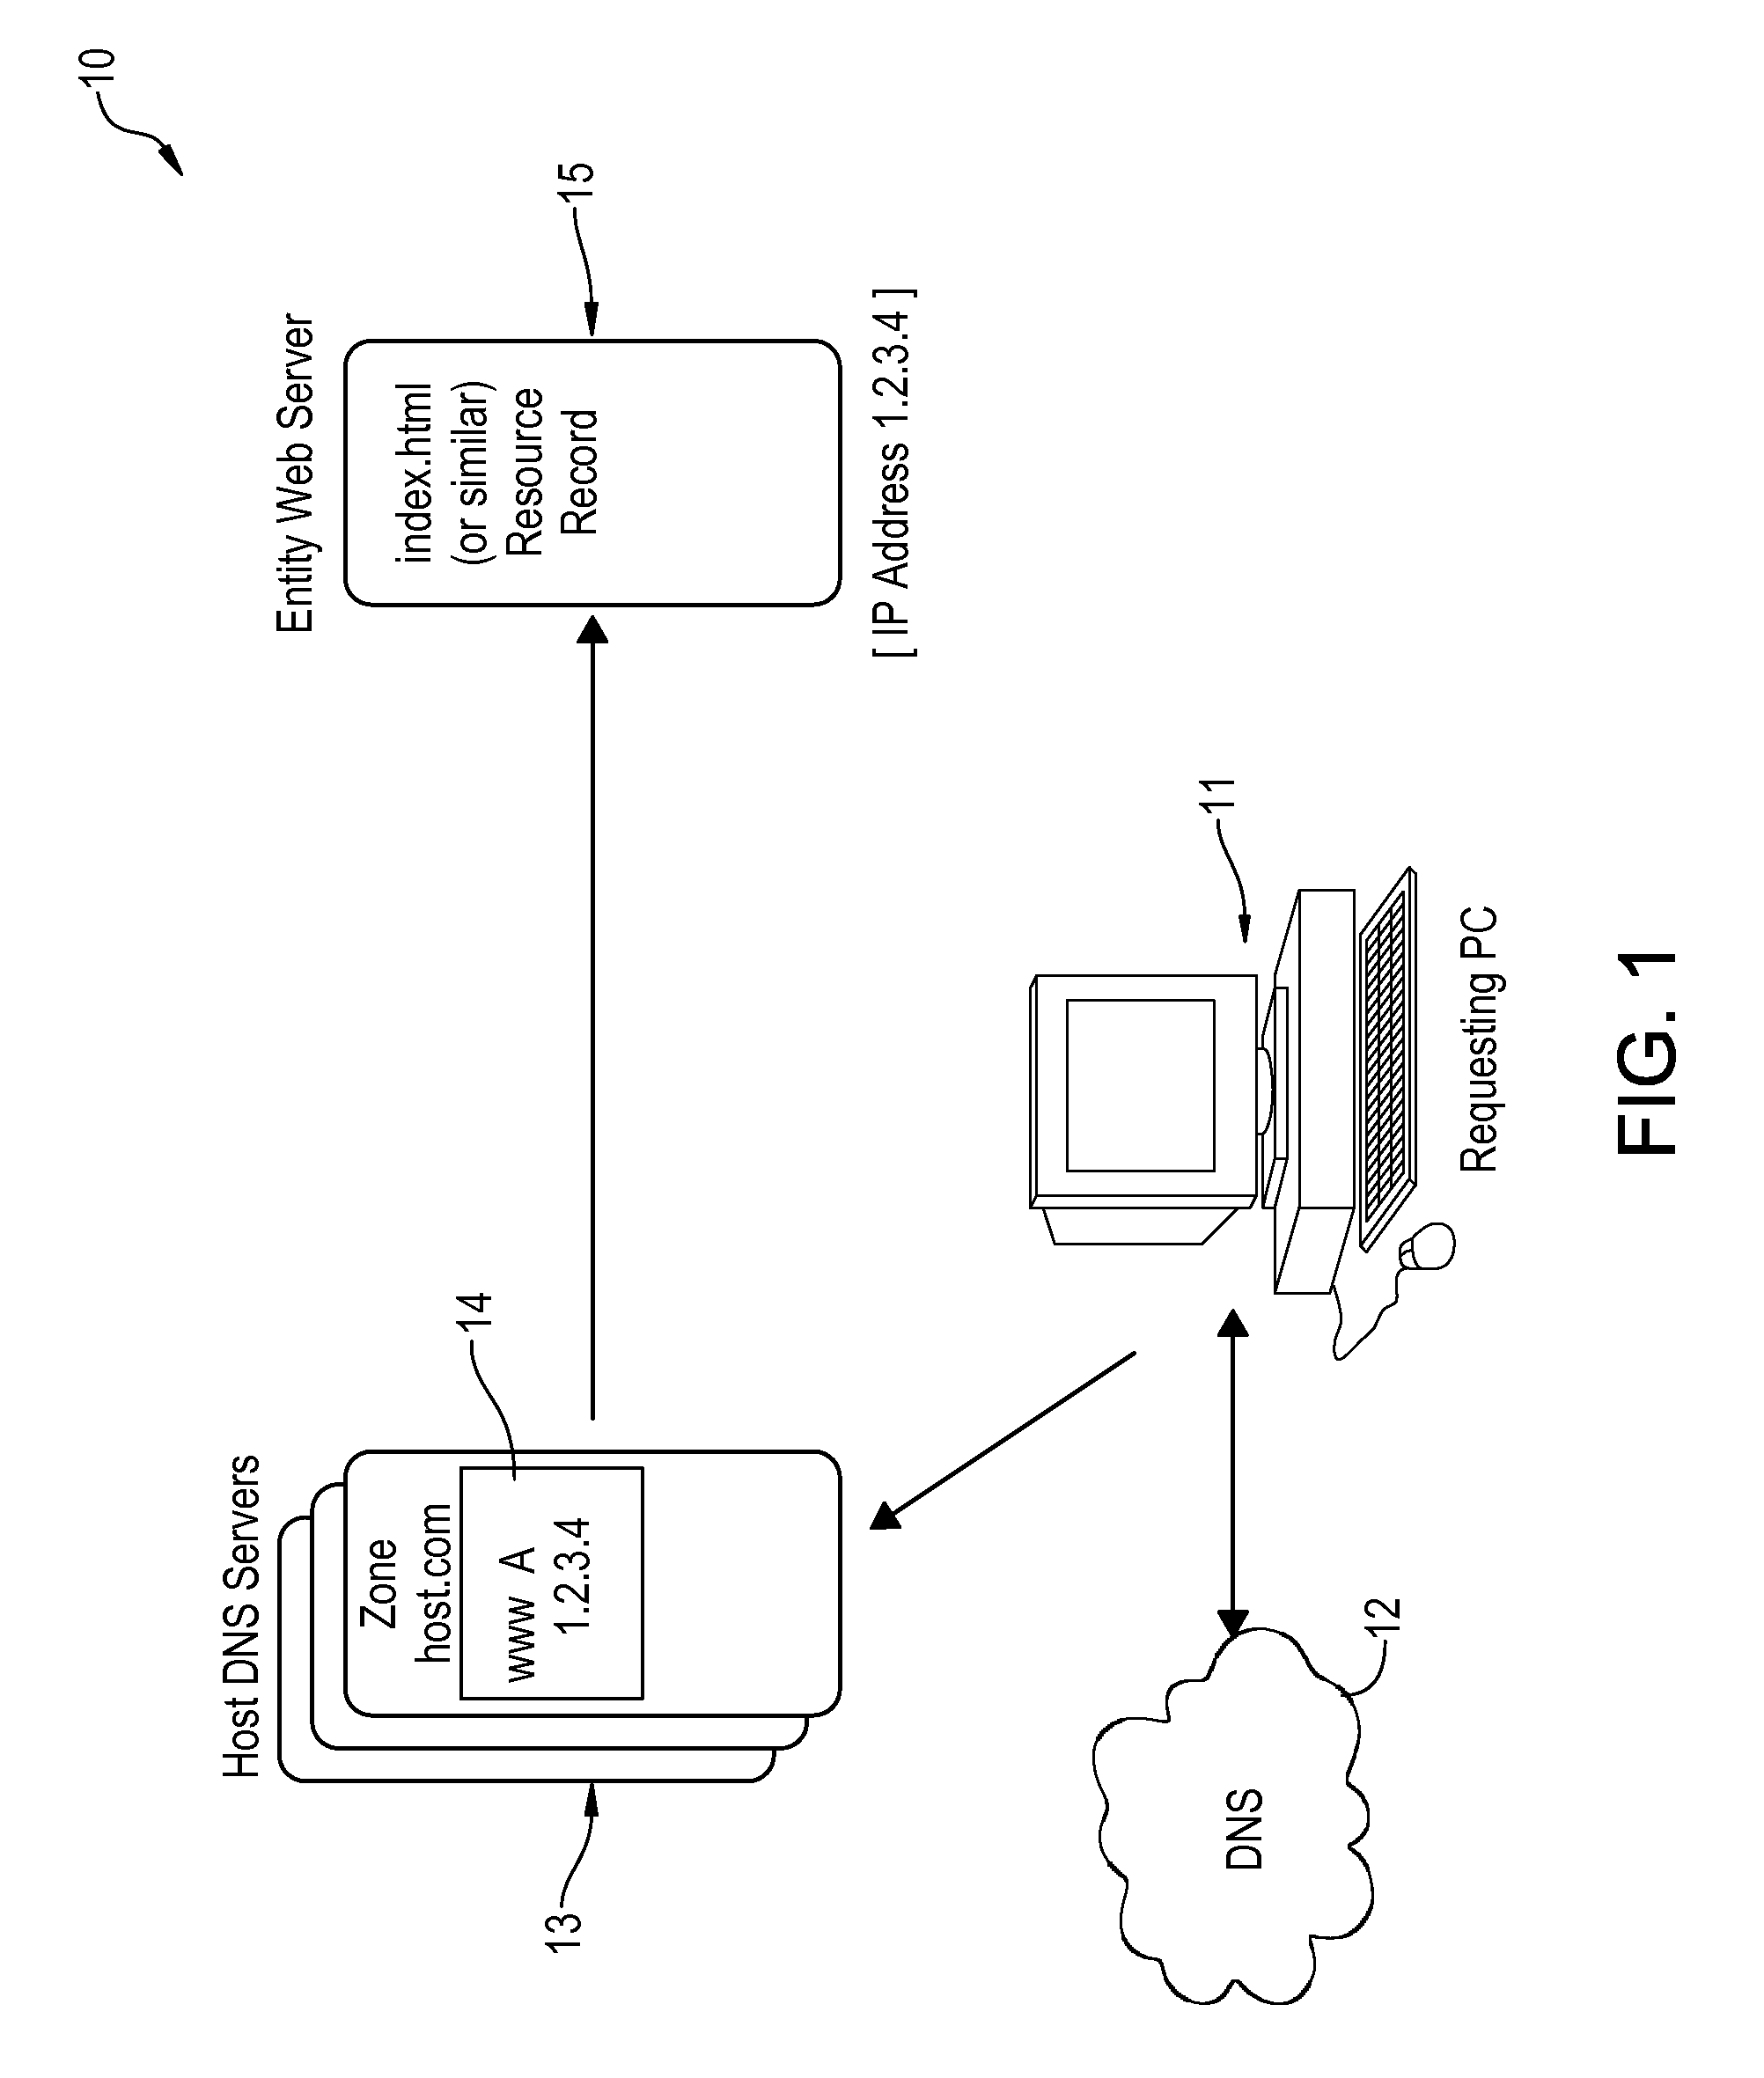 System and method for the issuance of an emergency text alert in response to the redirection of a website